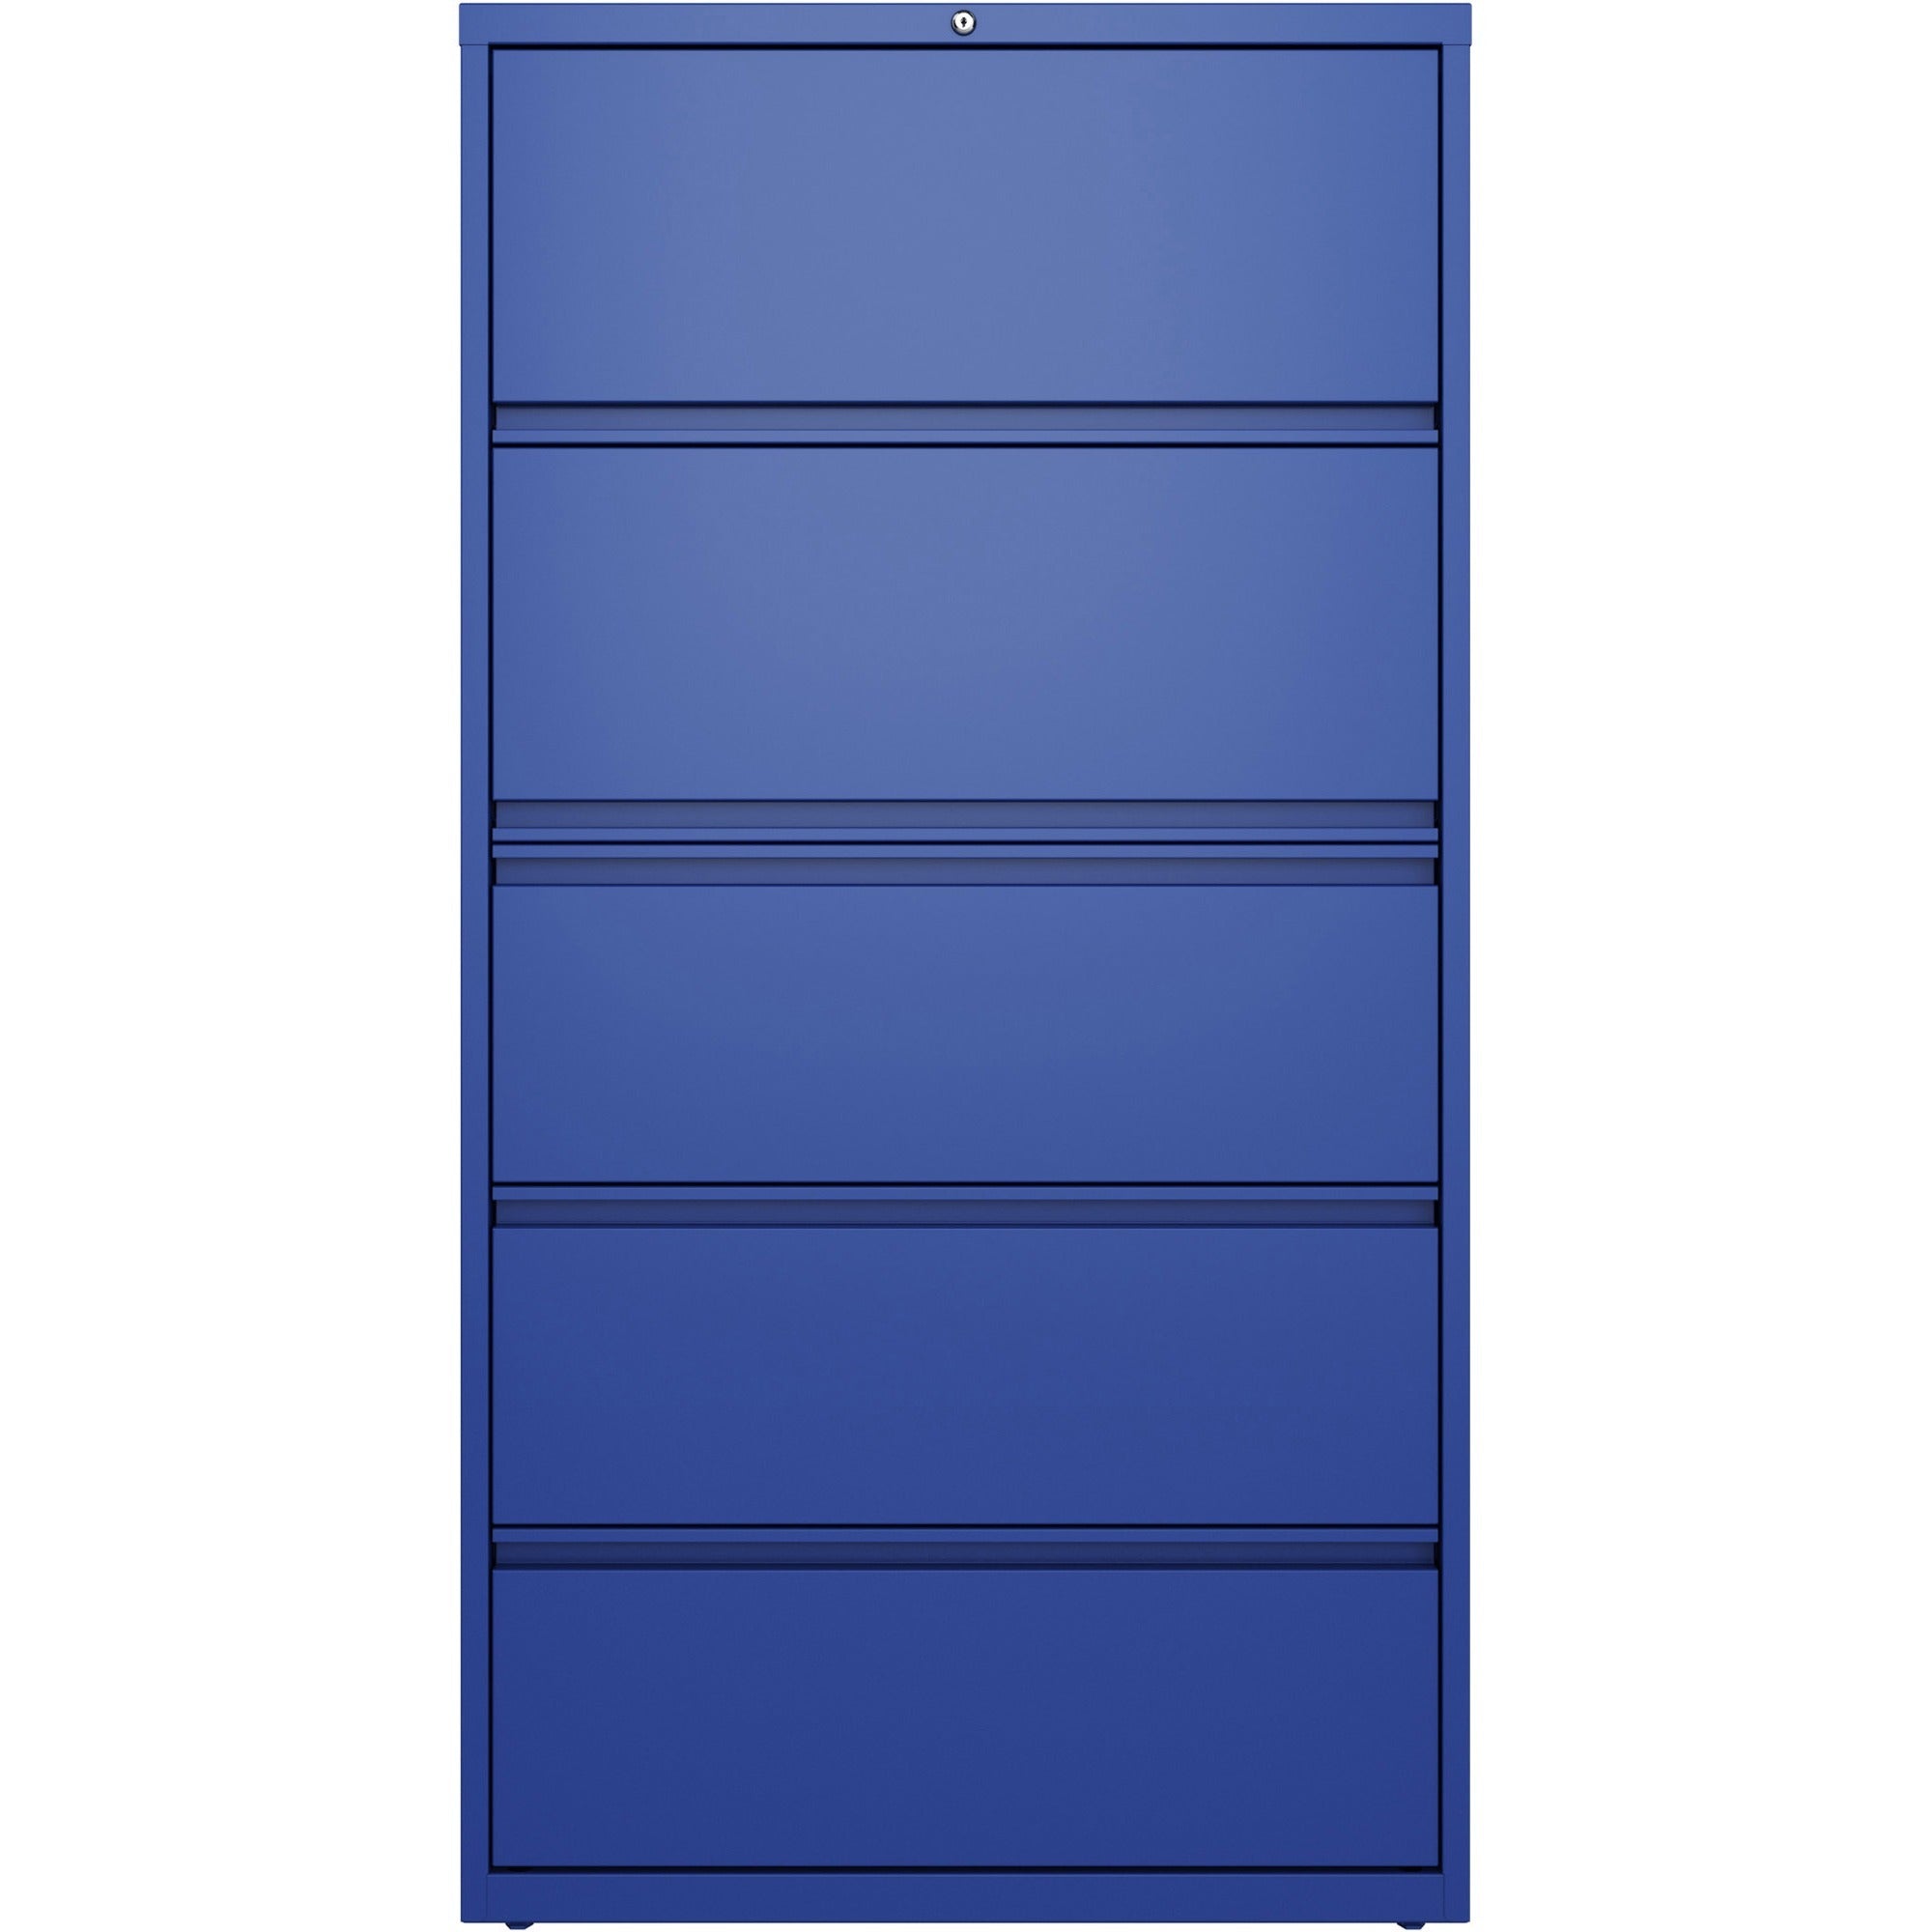 lorell-fortress-series-lateral-file-w-roll-out-posting-shelf-36-x-188-x-678-5-x-drawers-for-file-letter-legal-a4-lateral-hanging-rail-label-holder-durable-nonporous-surface-removable-lock-locking-bar-pull-out-drawer-ball-bea_llr03122 - 2